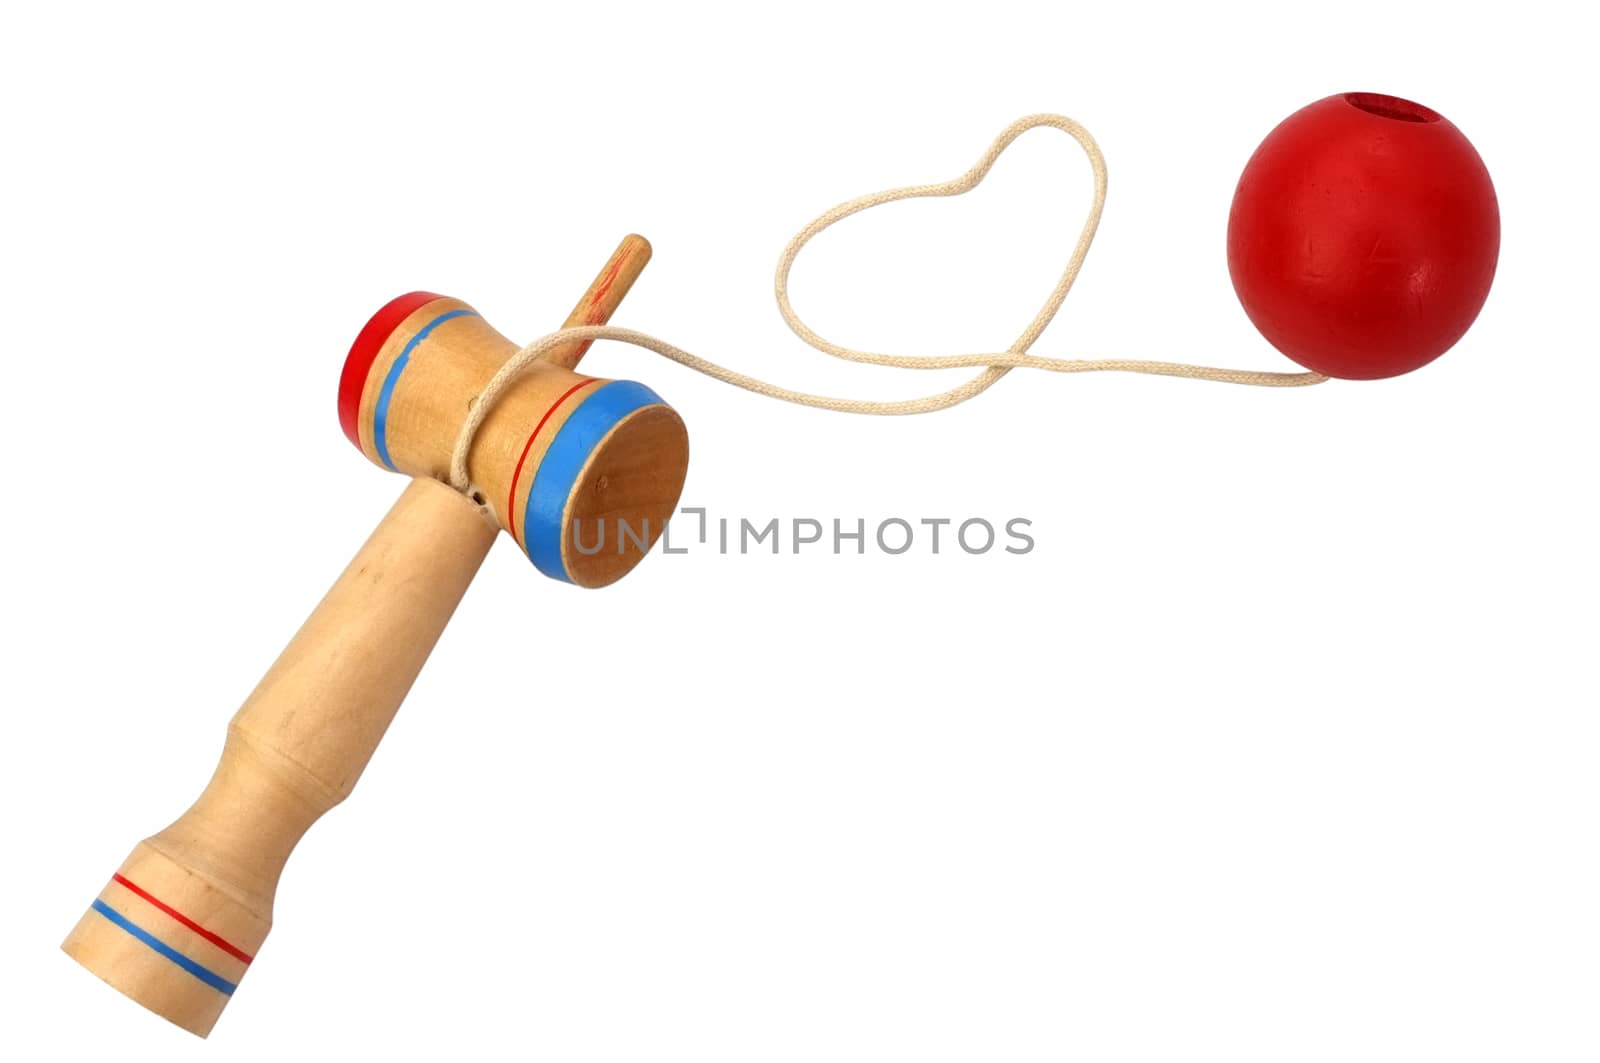 Kendama, a traditional Japanese toy consisting of a sword and a ball connected by a string rolled in heart shape